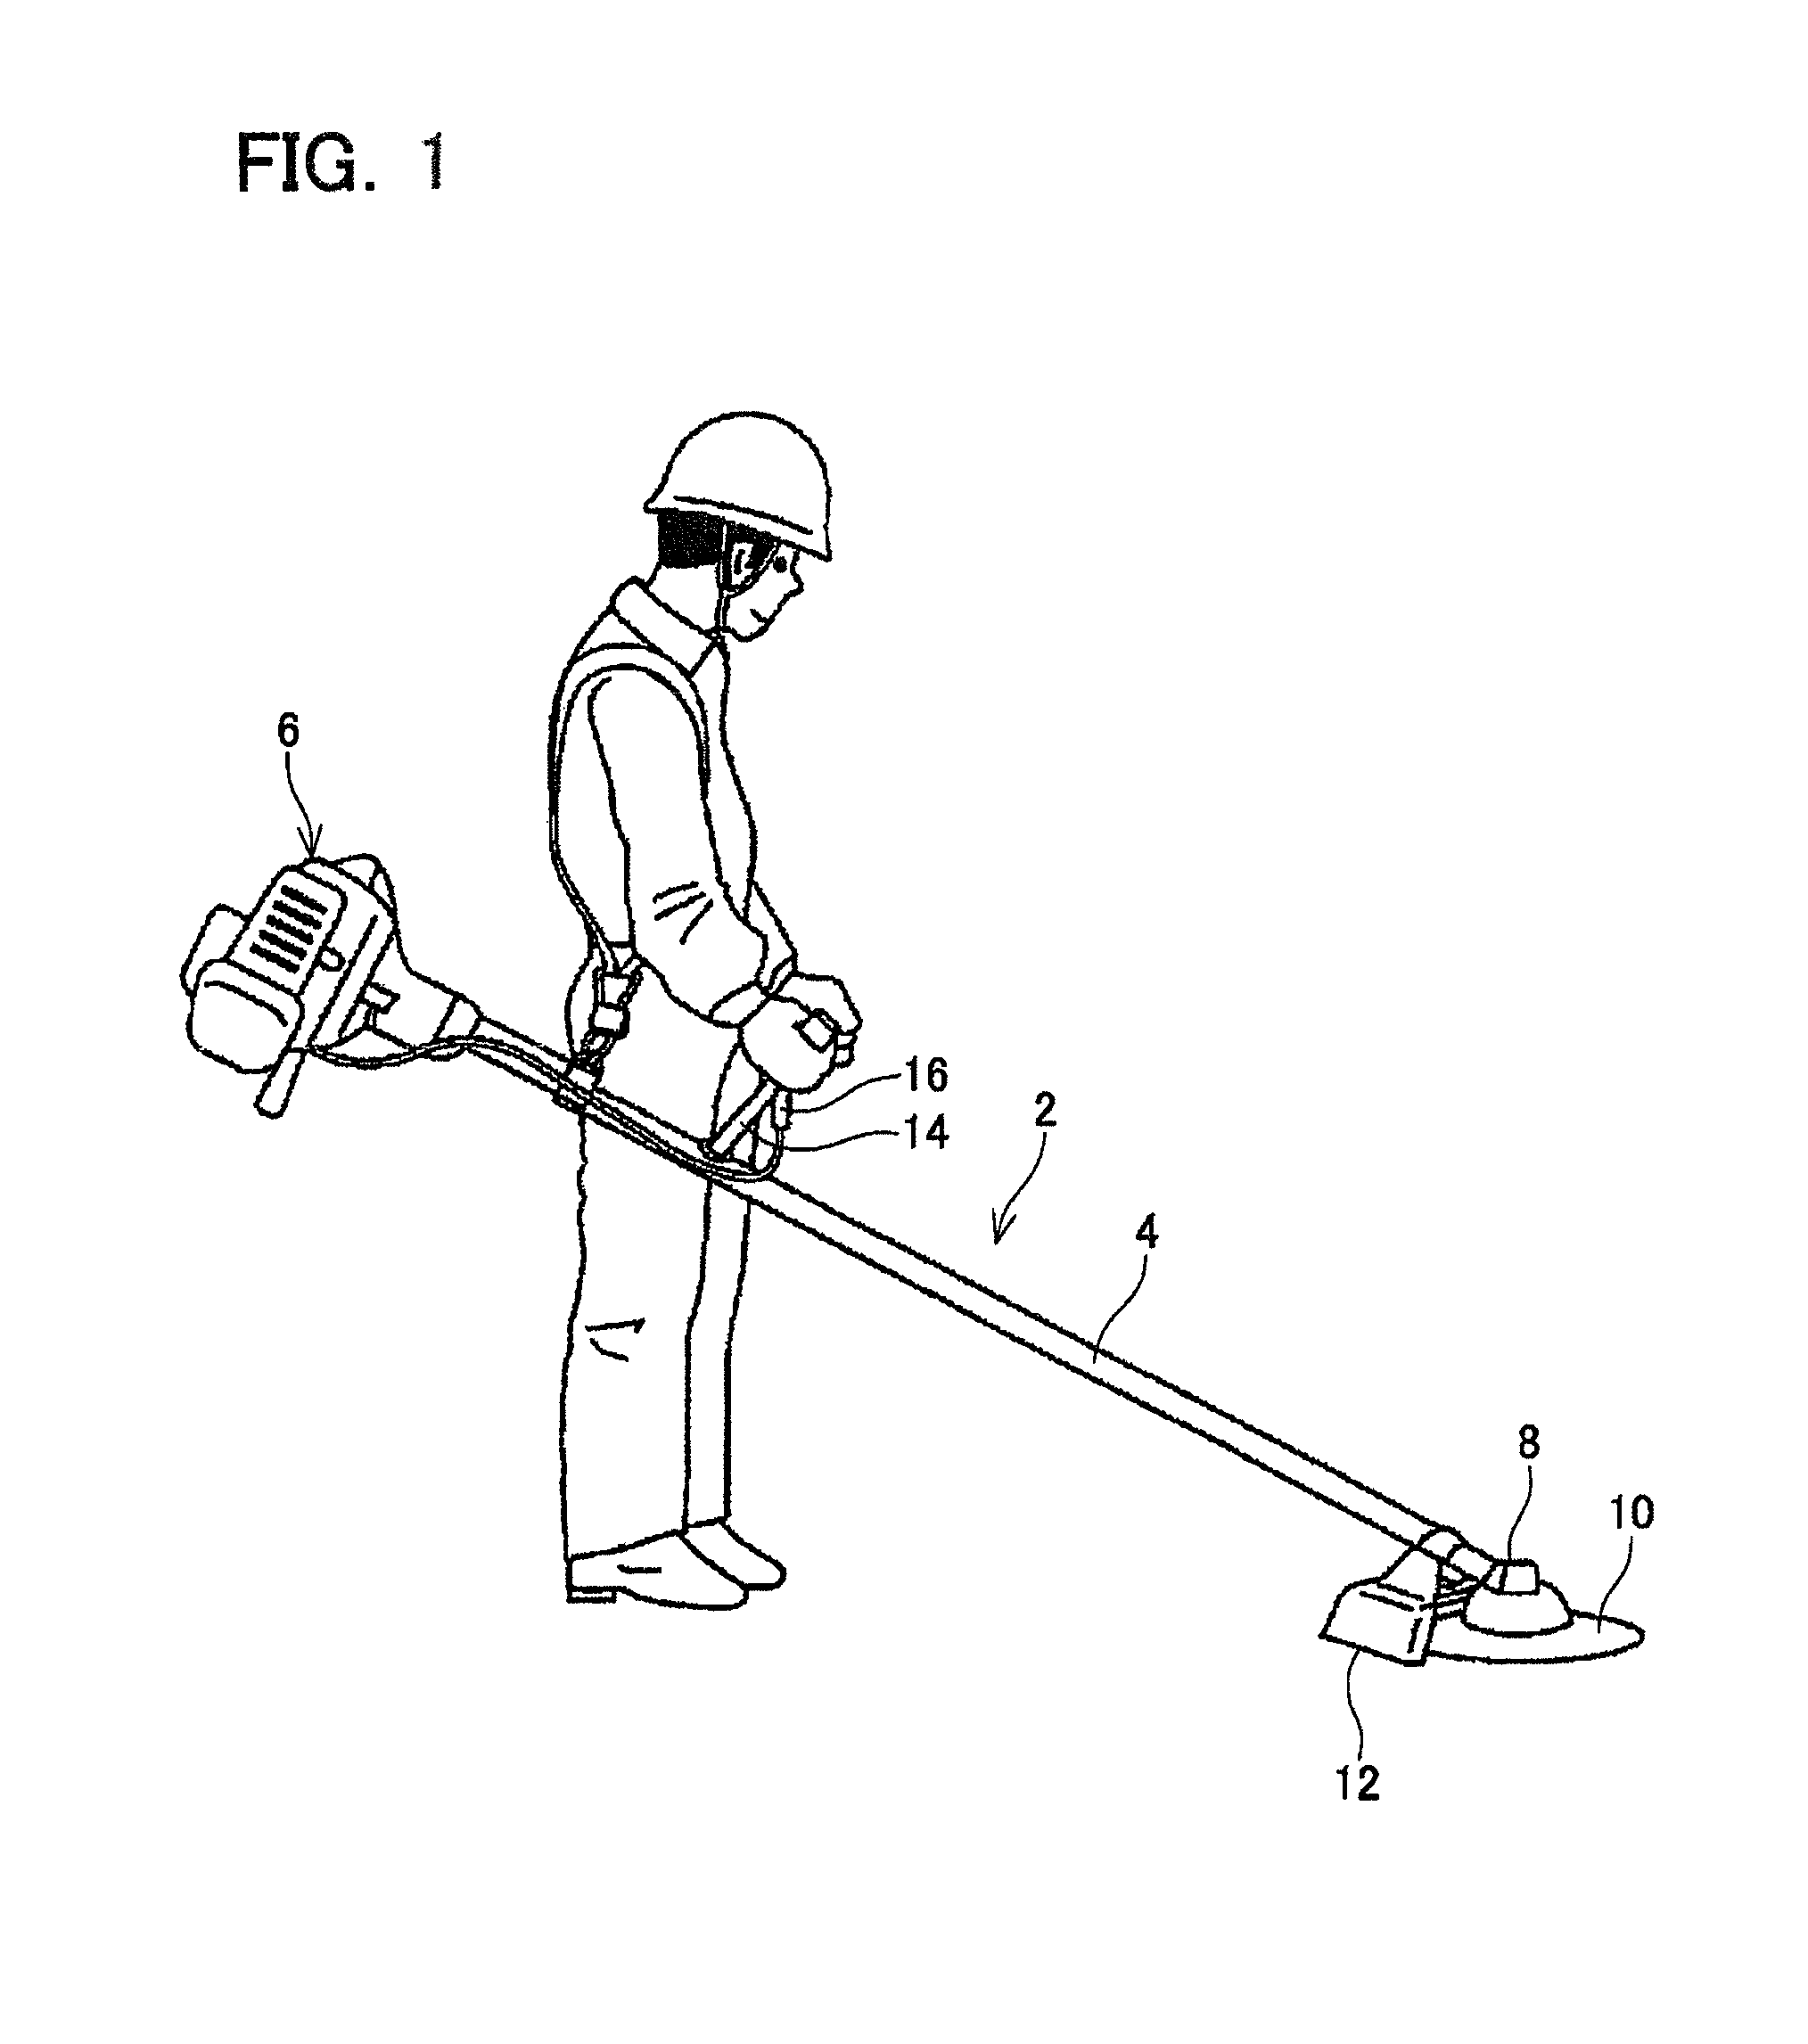 Human-carried work machine powered by hybrid drive system